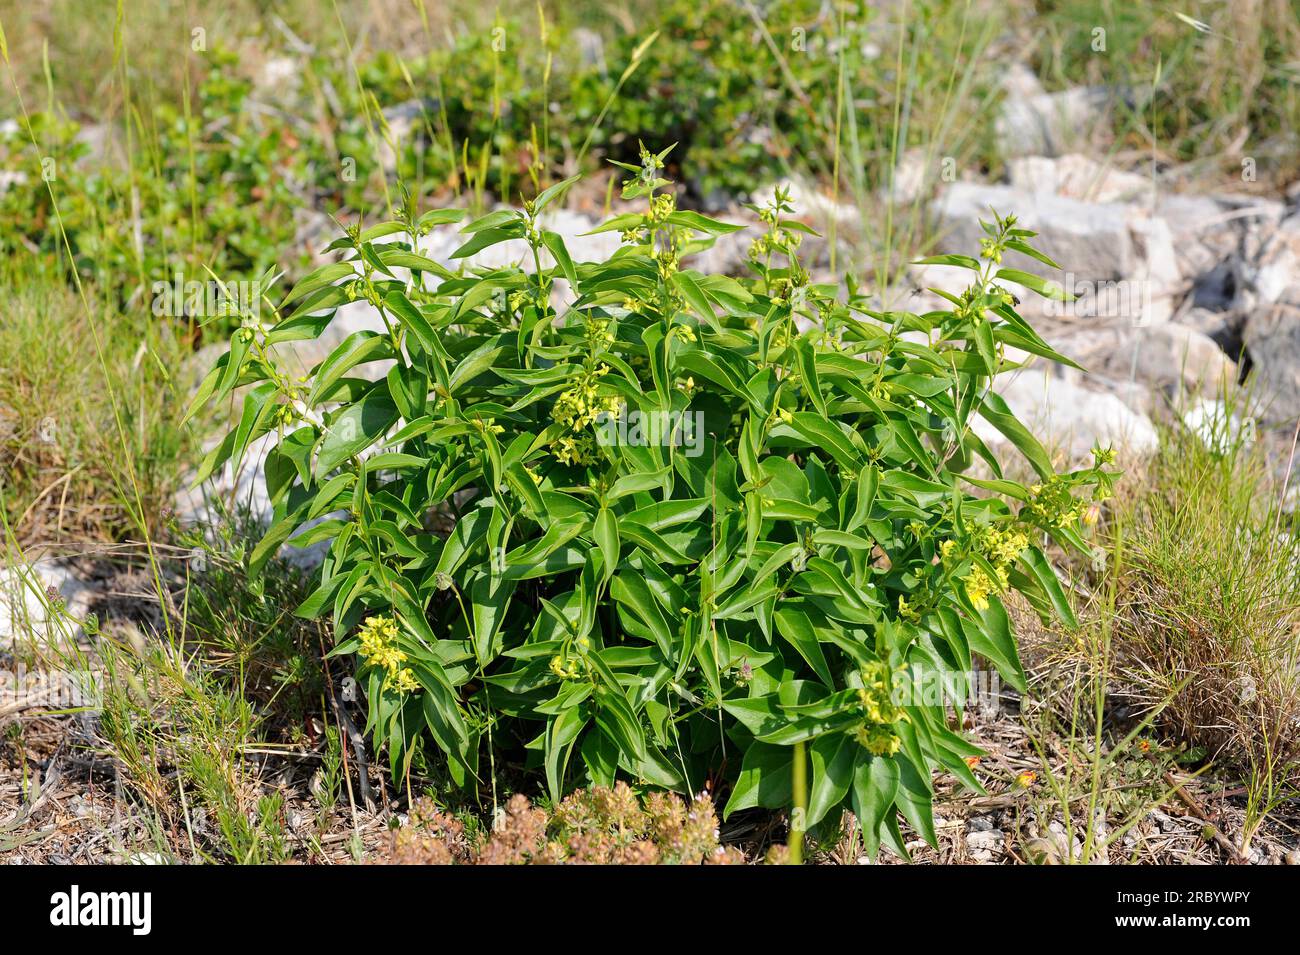 White swallow- wort (Vincetoxicum hirundinaria) is a perennial herb native to Europe and Asia. Grow especially in calcareous soils. It was used a medi Stock Photo